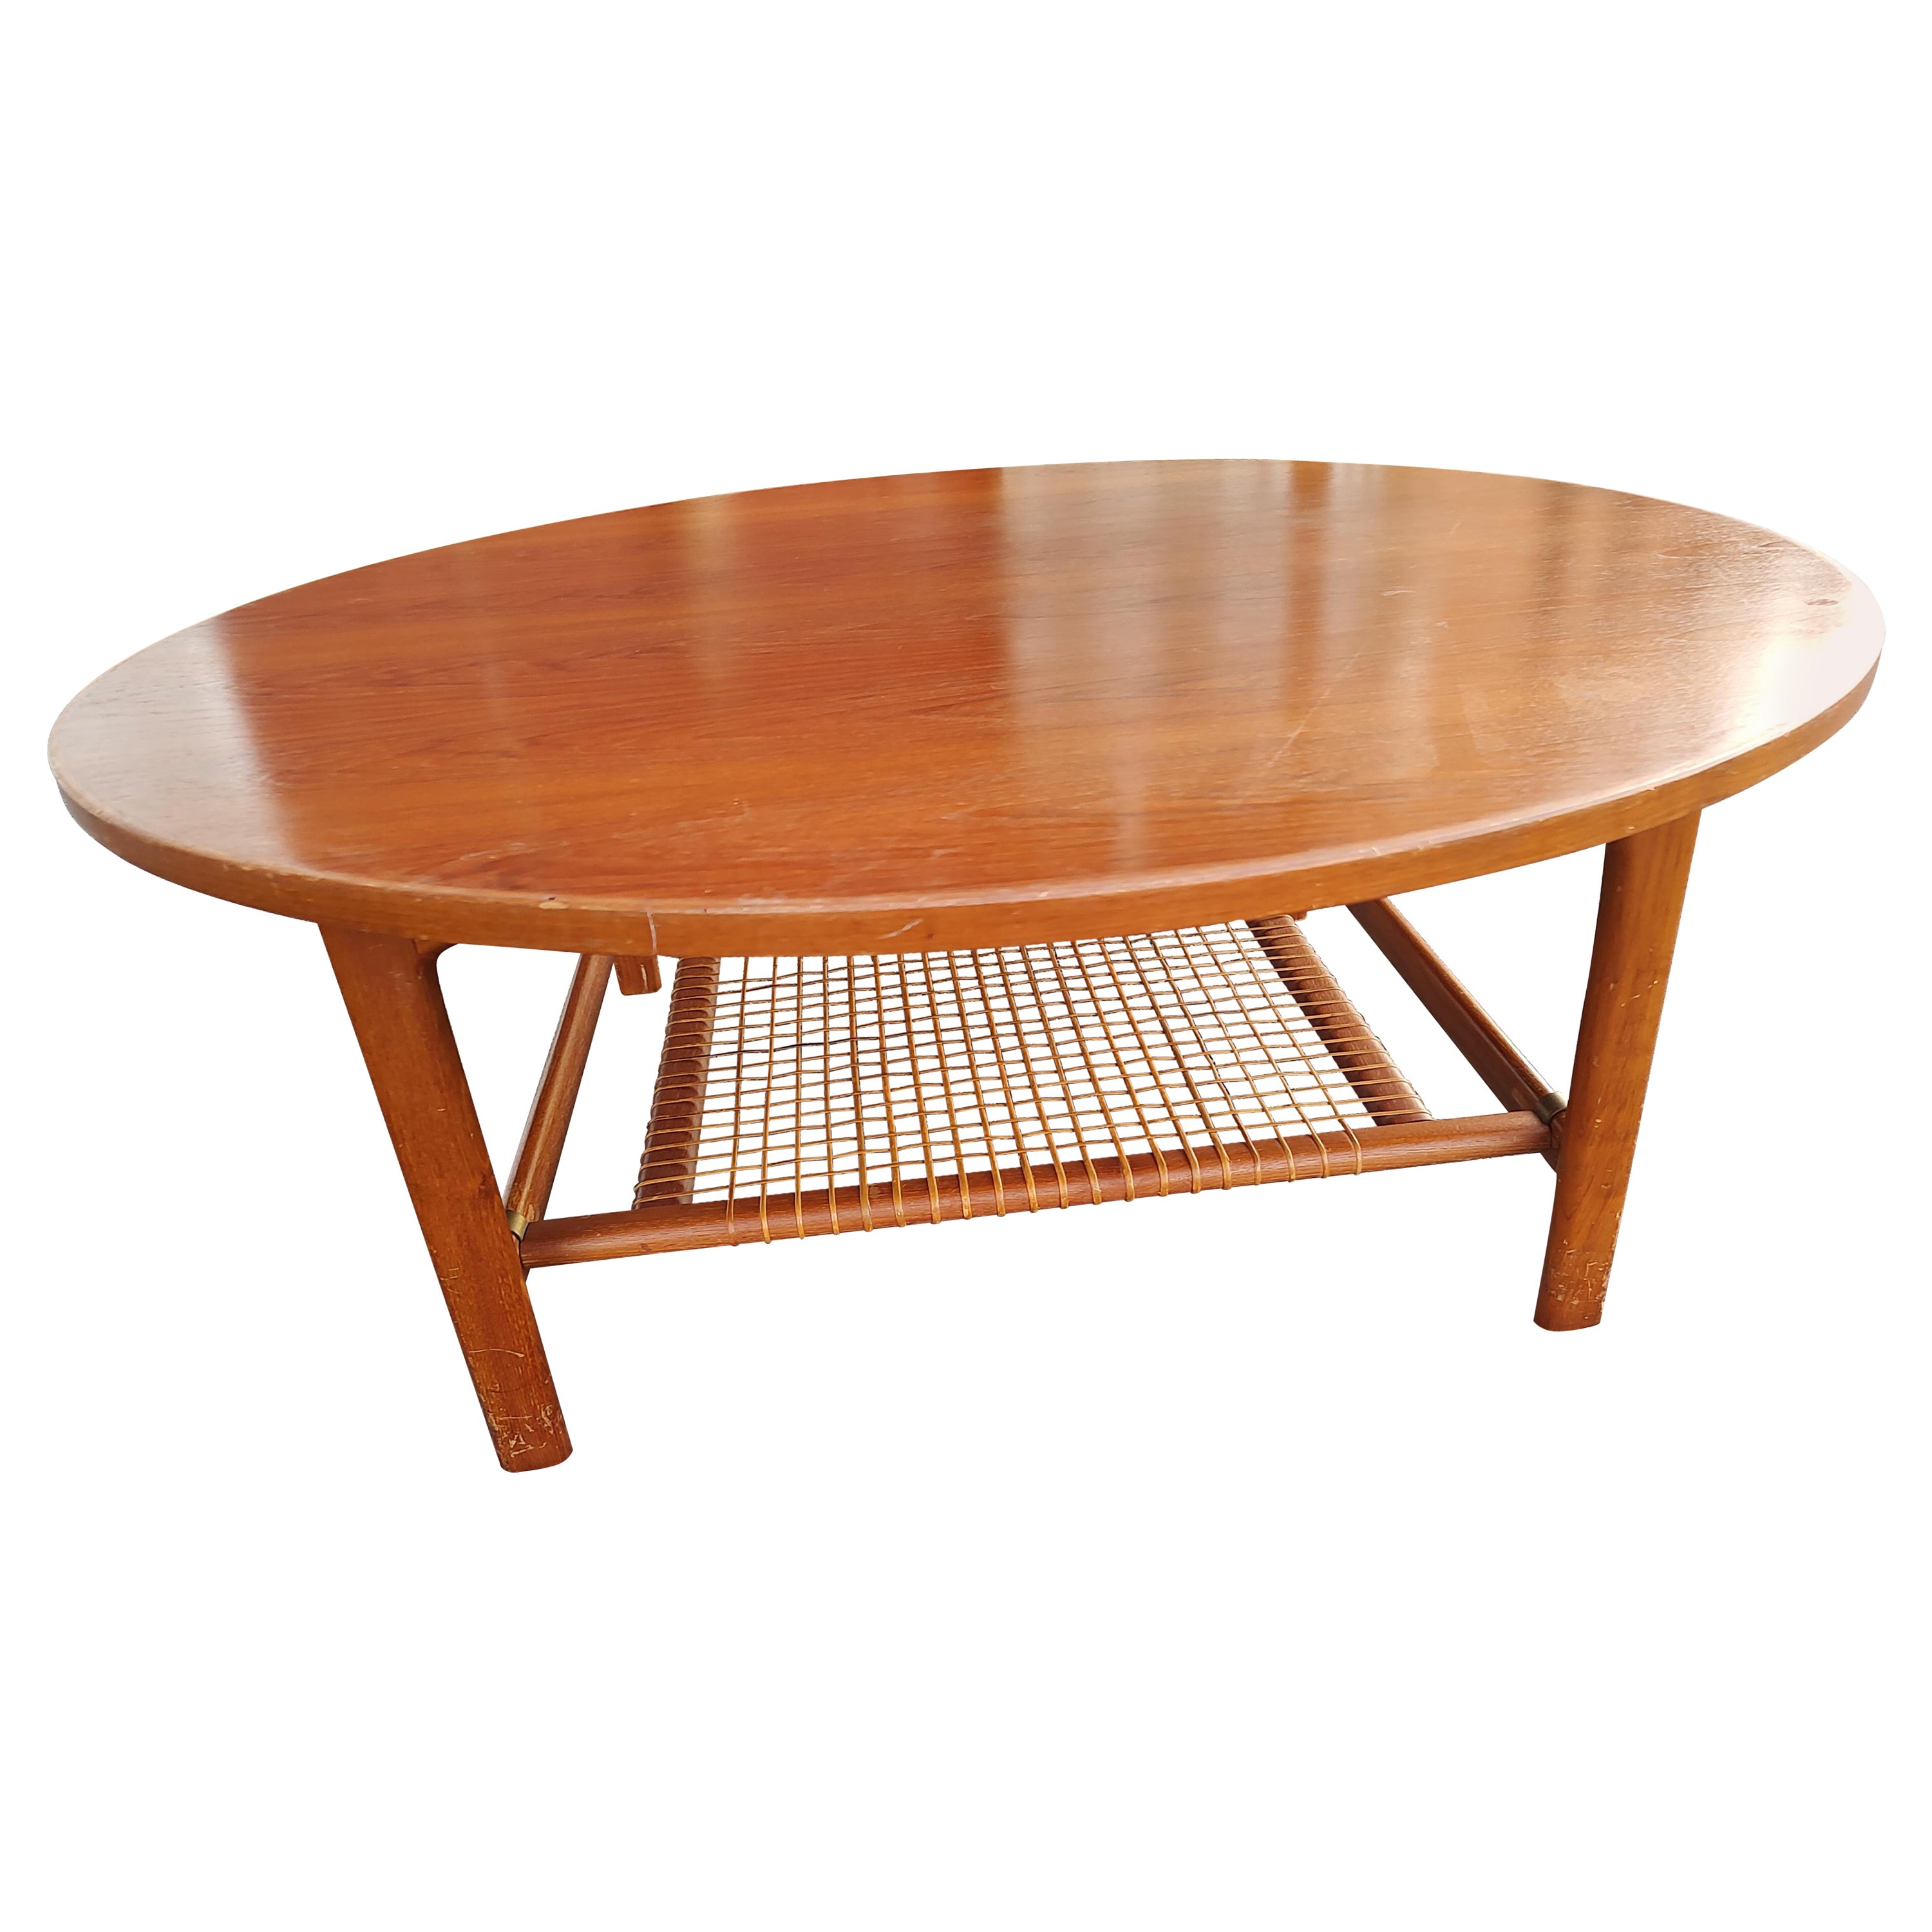 Mid-Century Modern Teak with Woven Shelf Cocktail Table by Dux Sweden